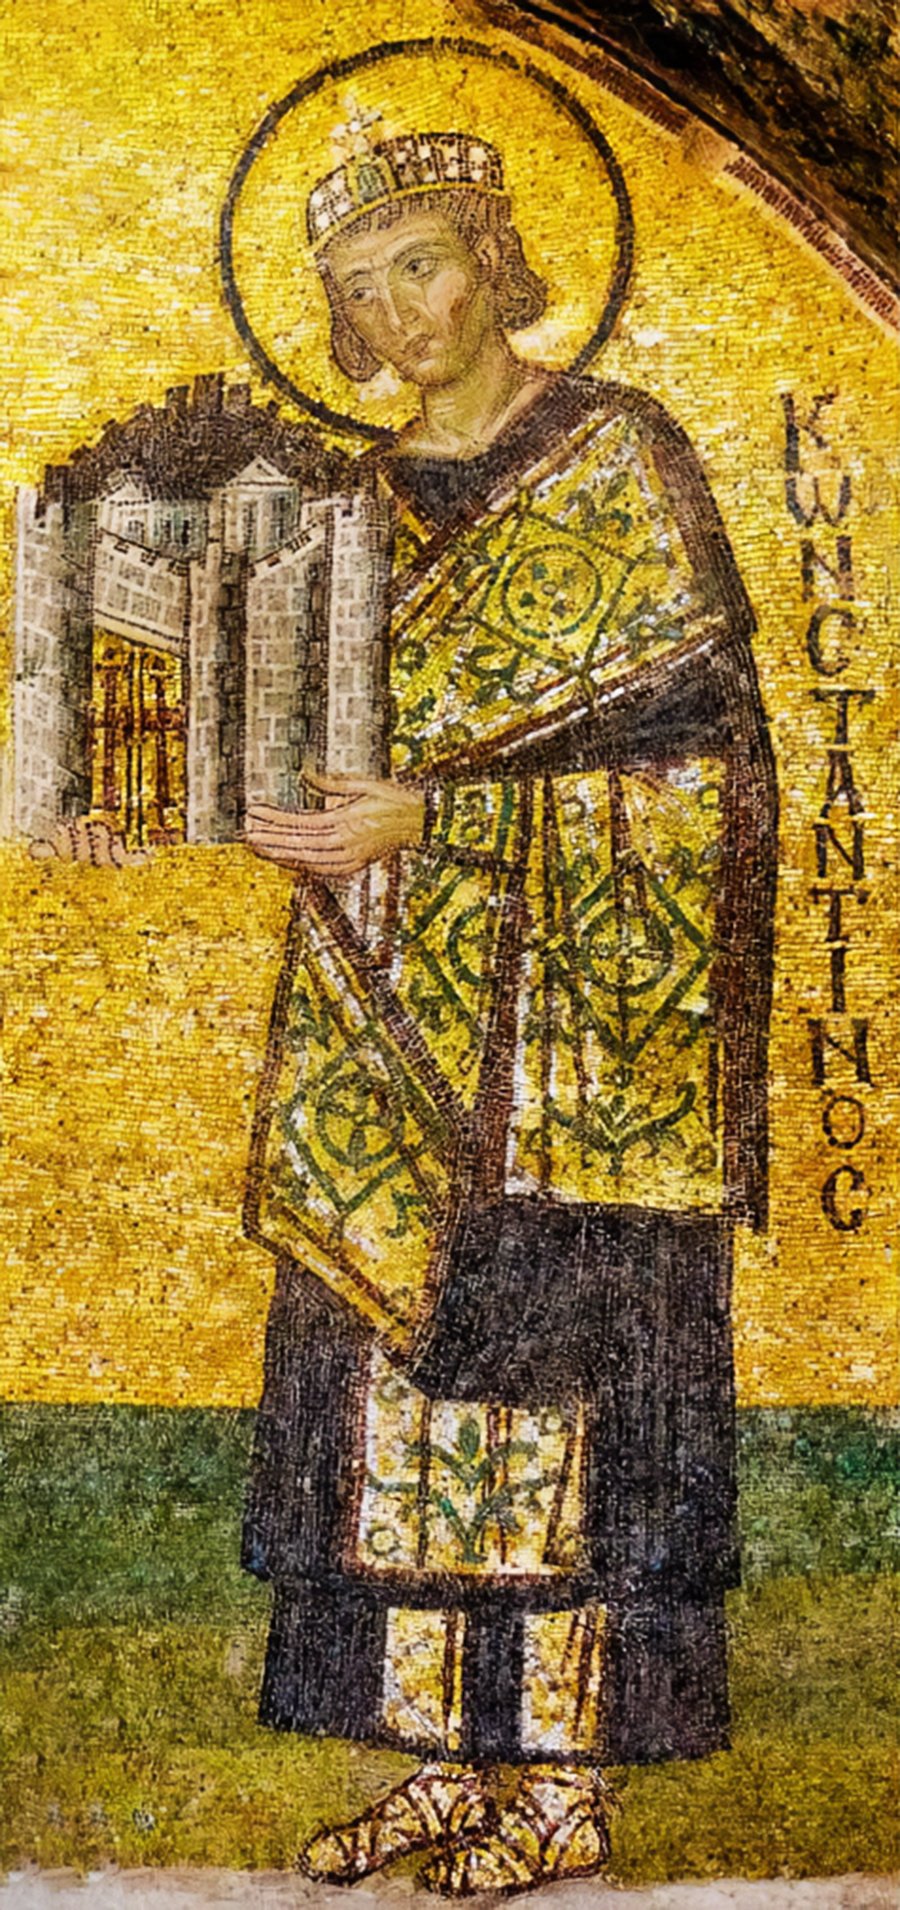 A mosaic of Emperor Constantine I holding a model of a church, with a yellow robe, a halo, a gold background, and the text “KWCANTIOC” in the top right corner.